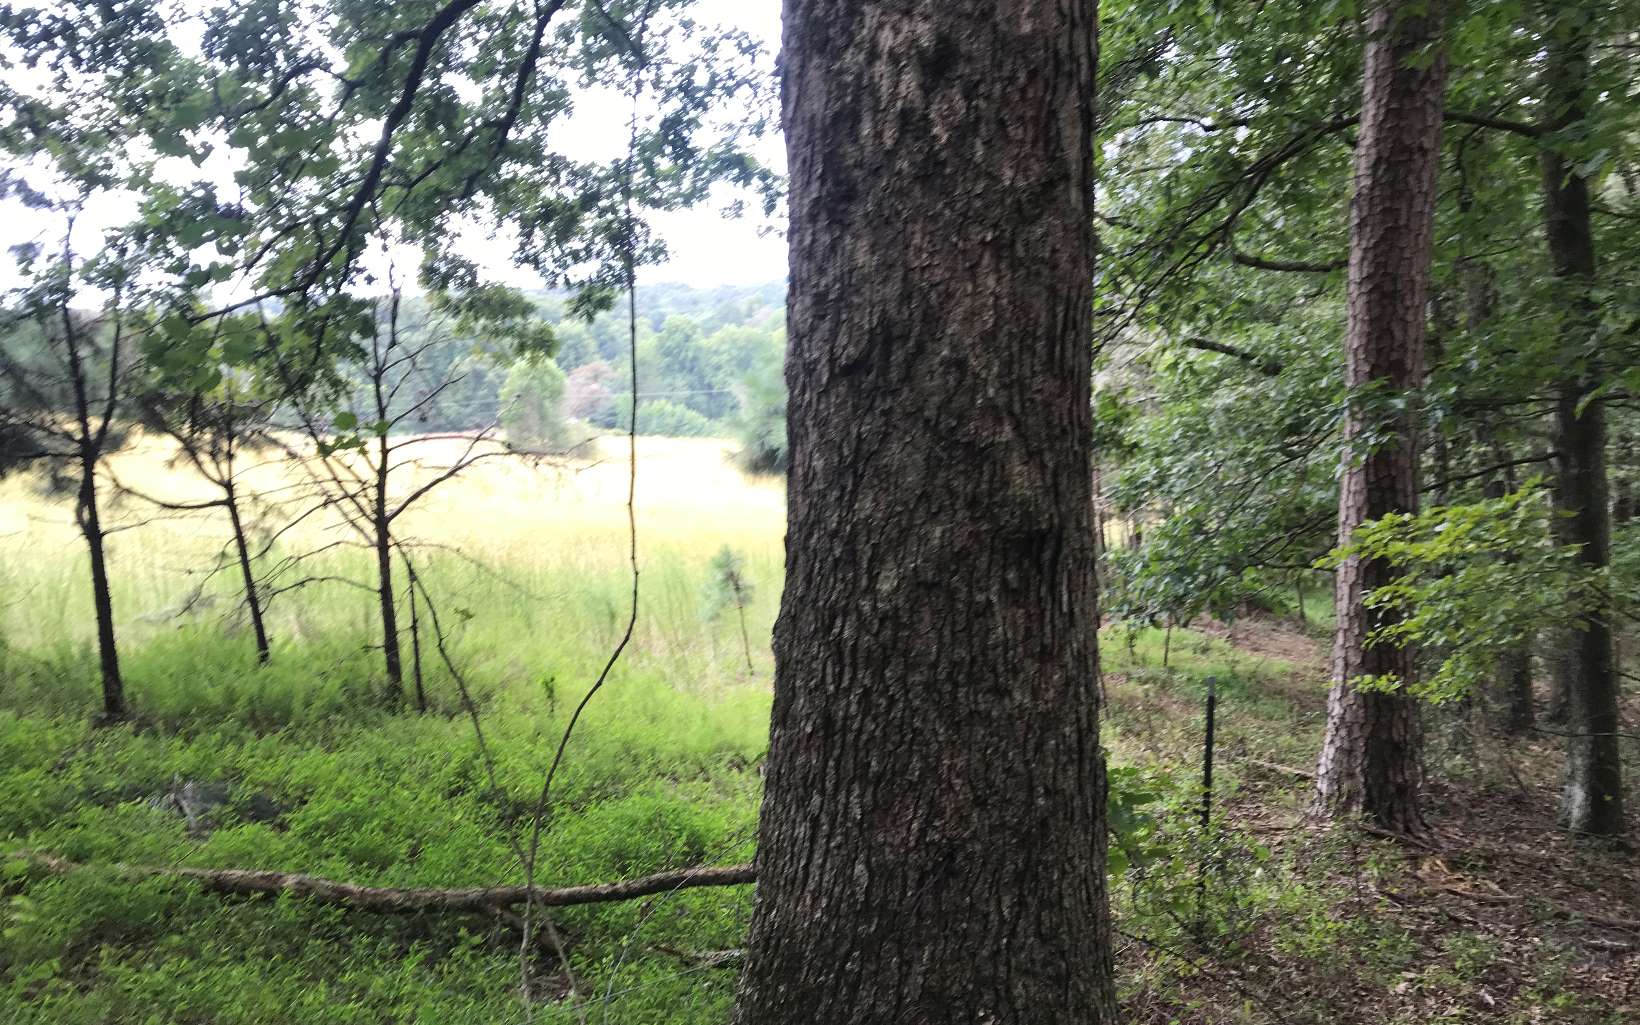 Seller will sell off 25 acres that joins pasture end. Buyer to pay for survey. This property goes from Hickory Ridge Road to the pasture on Yukon road. Water available, joins Hickory Ridge subdivision, Shady Acres Subdivision and has access frrom Yukon Road